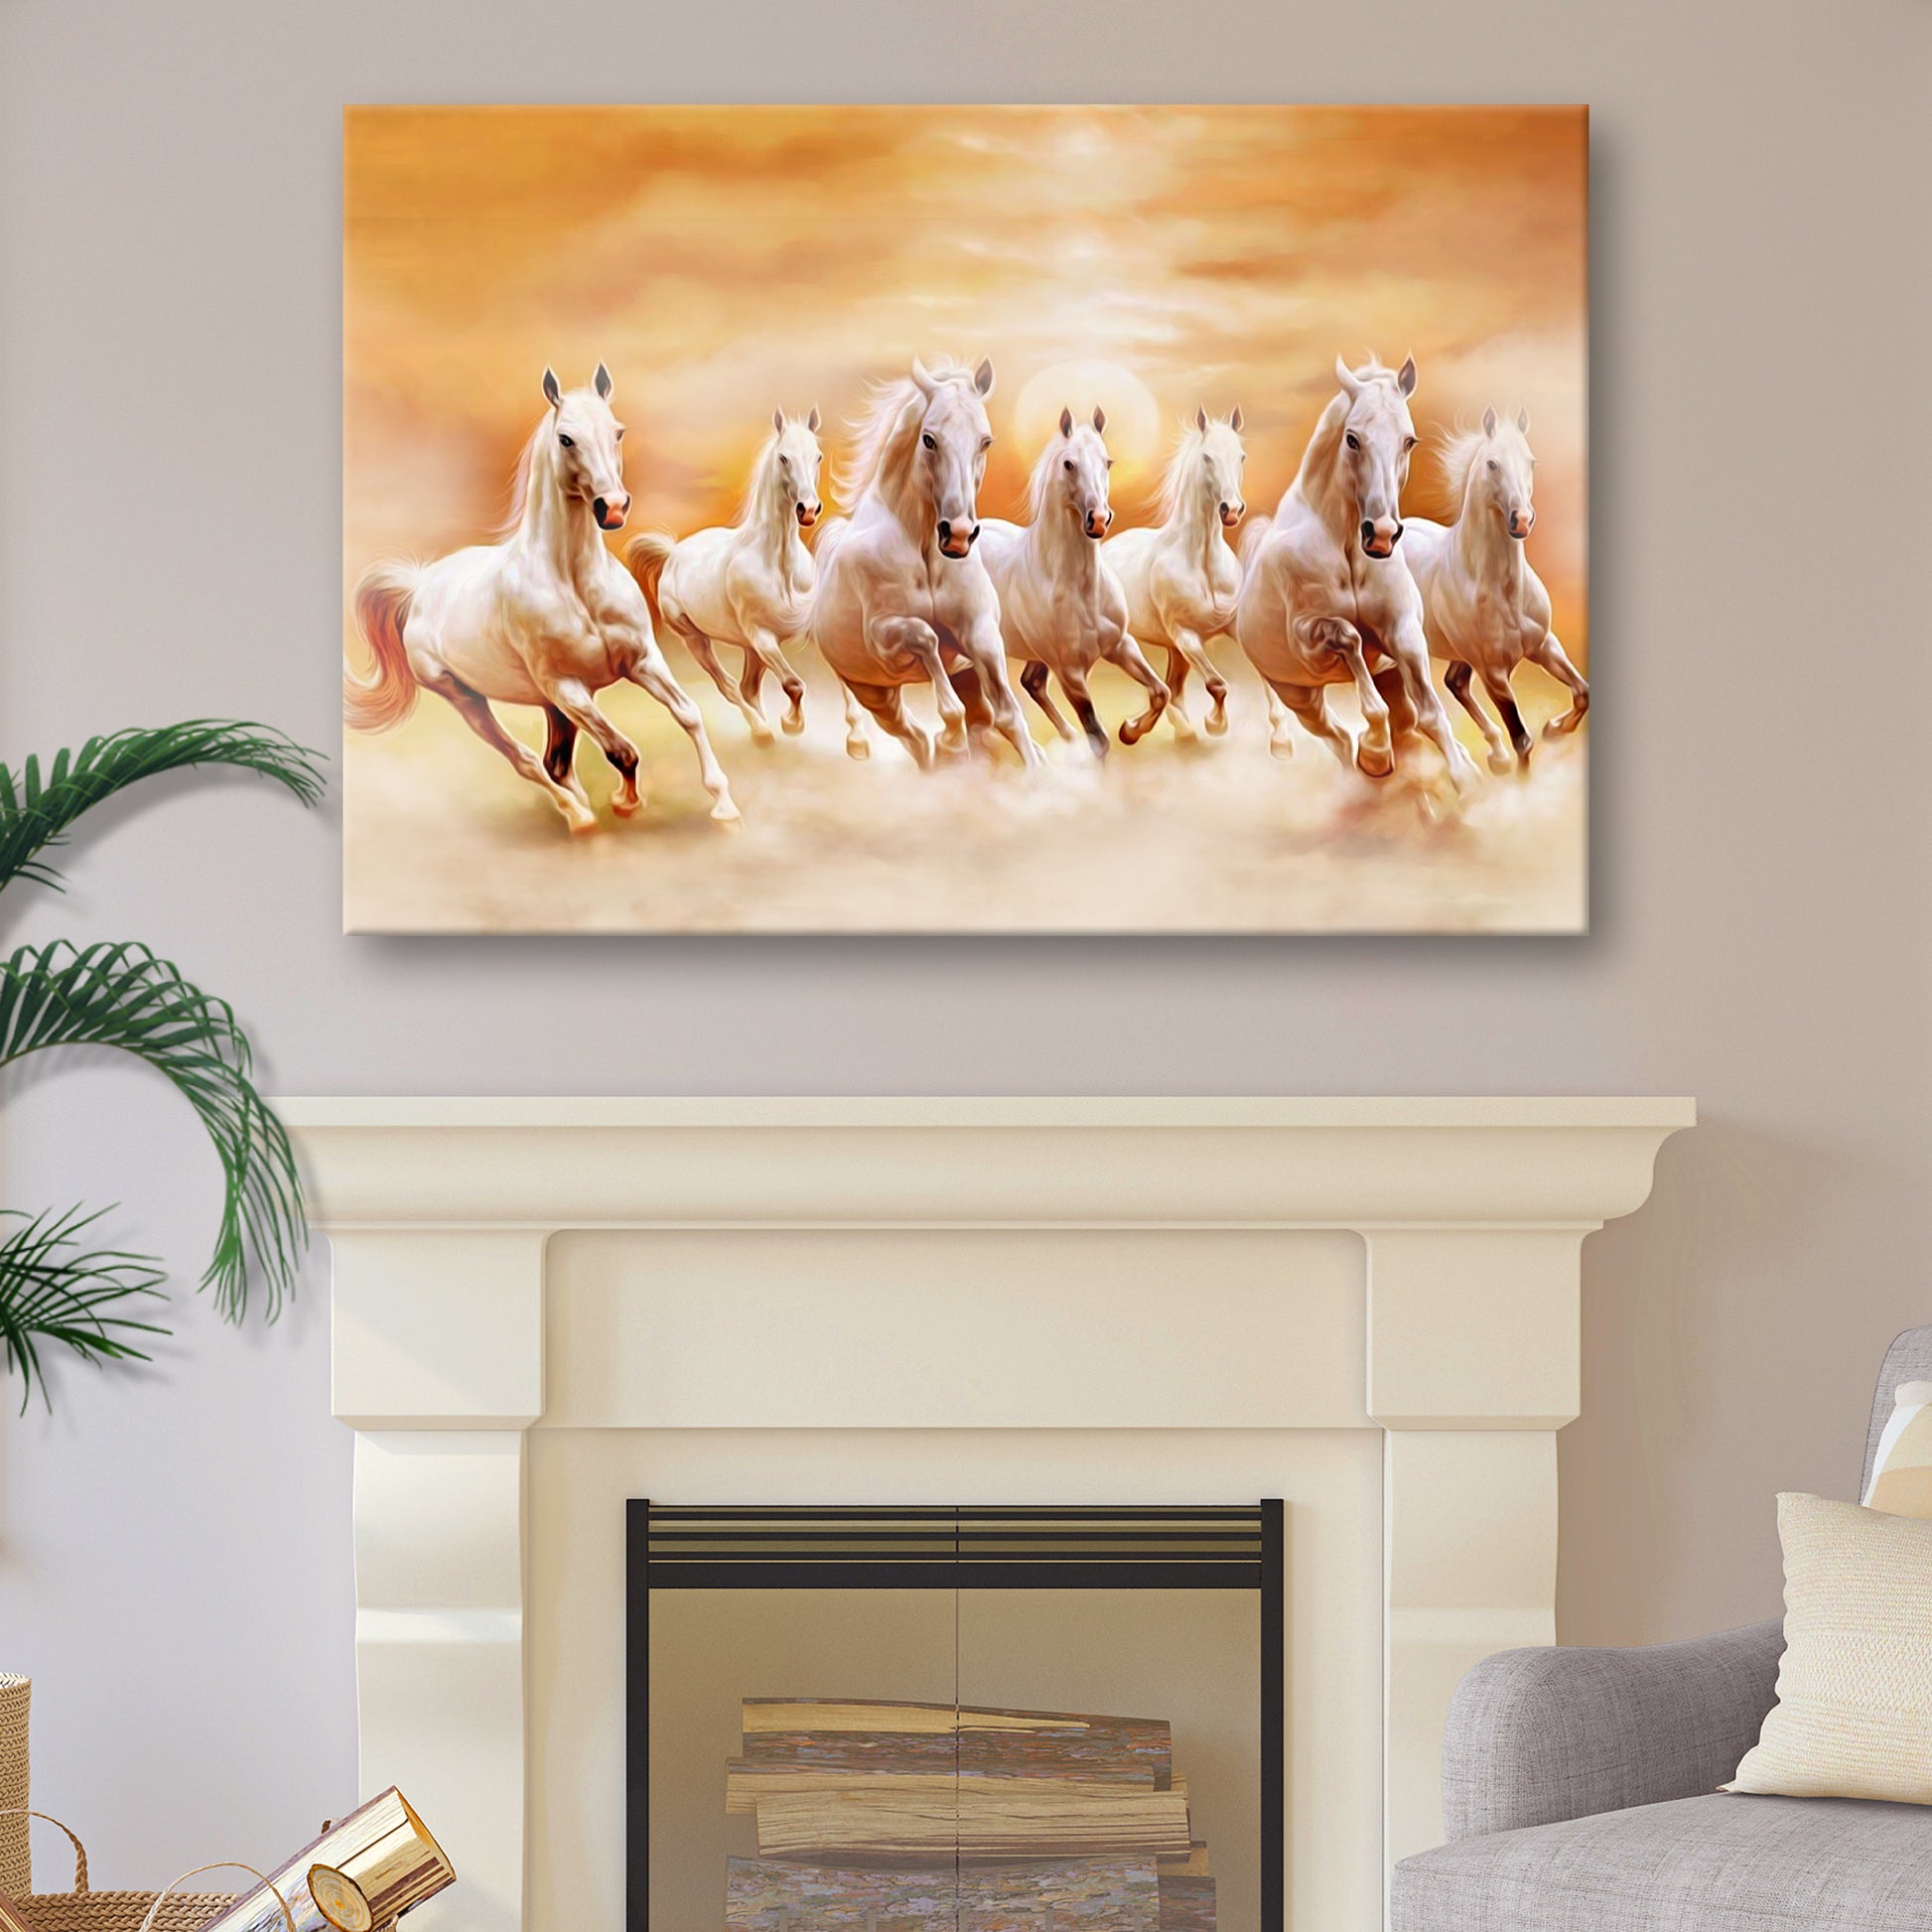 Running Horses At Sunrise Canvas Wall Art - Image by Tailored Canvases